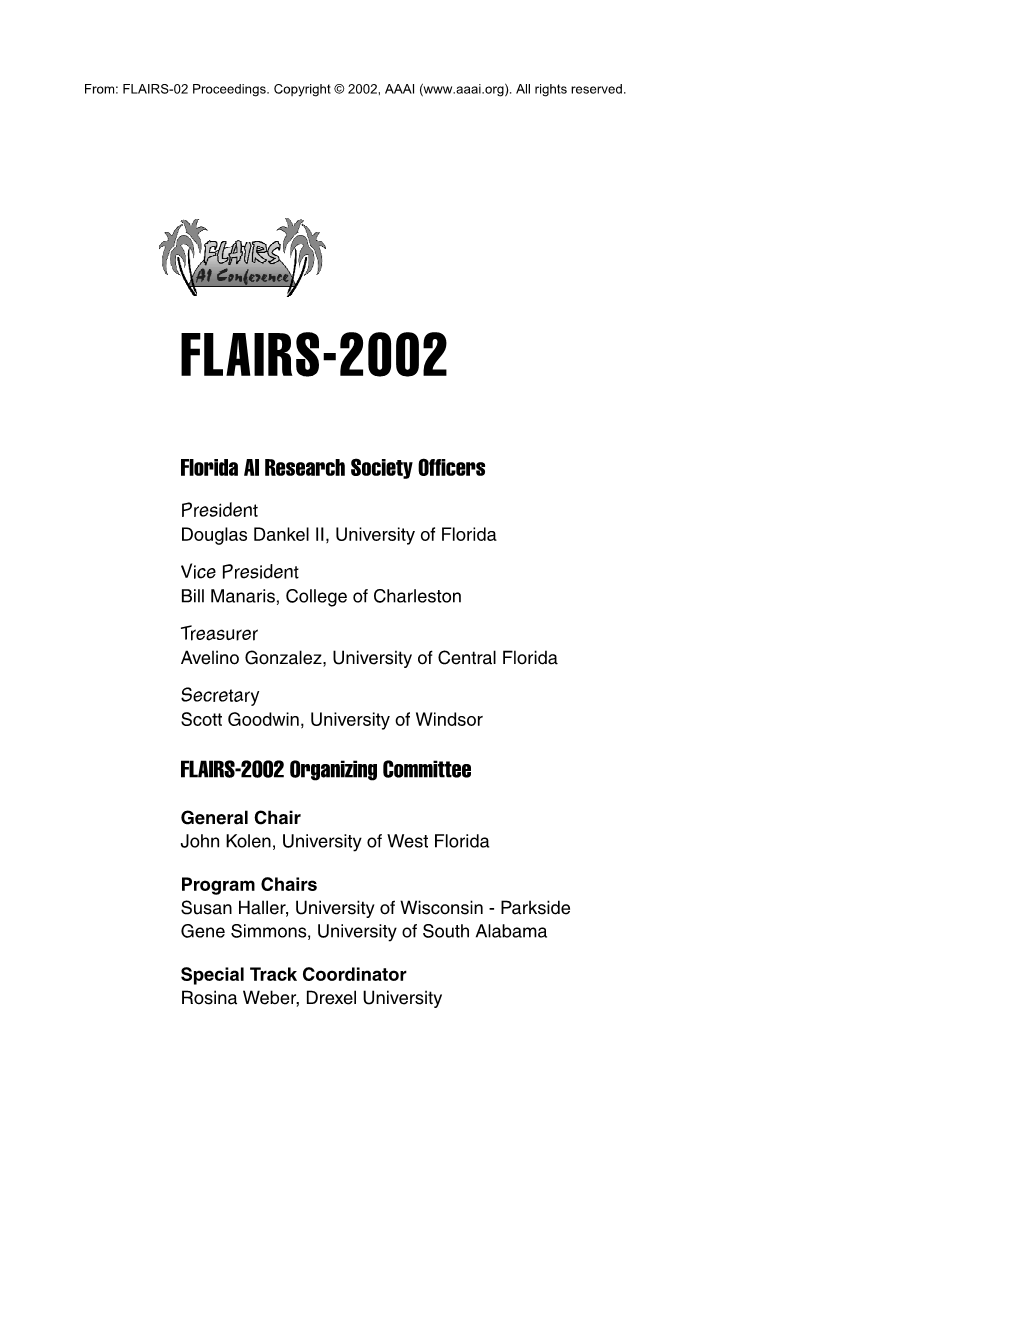 Flairs 2002 Officers and Program Committee